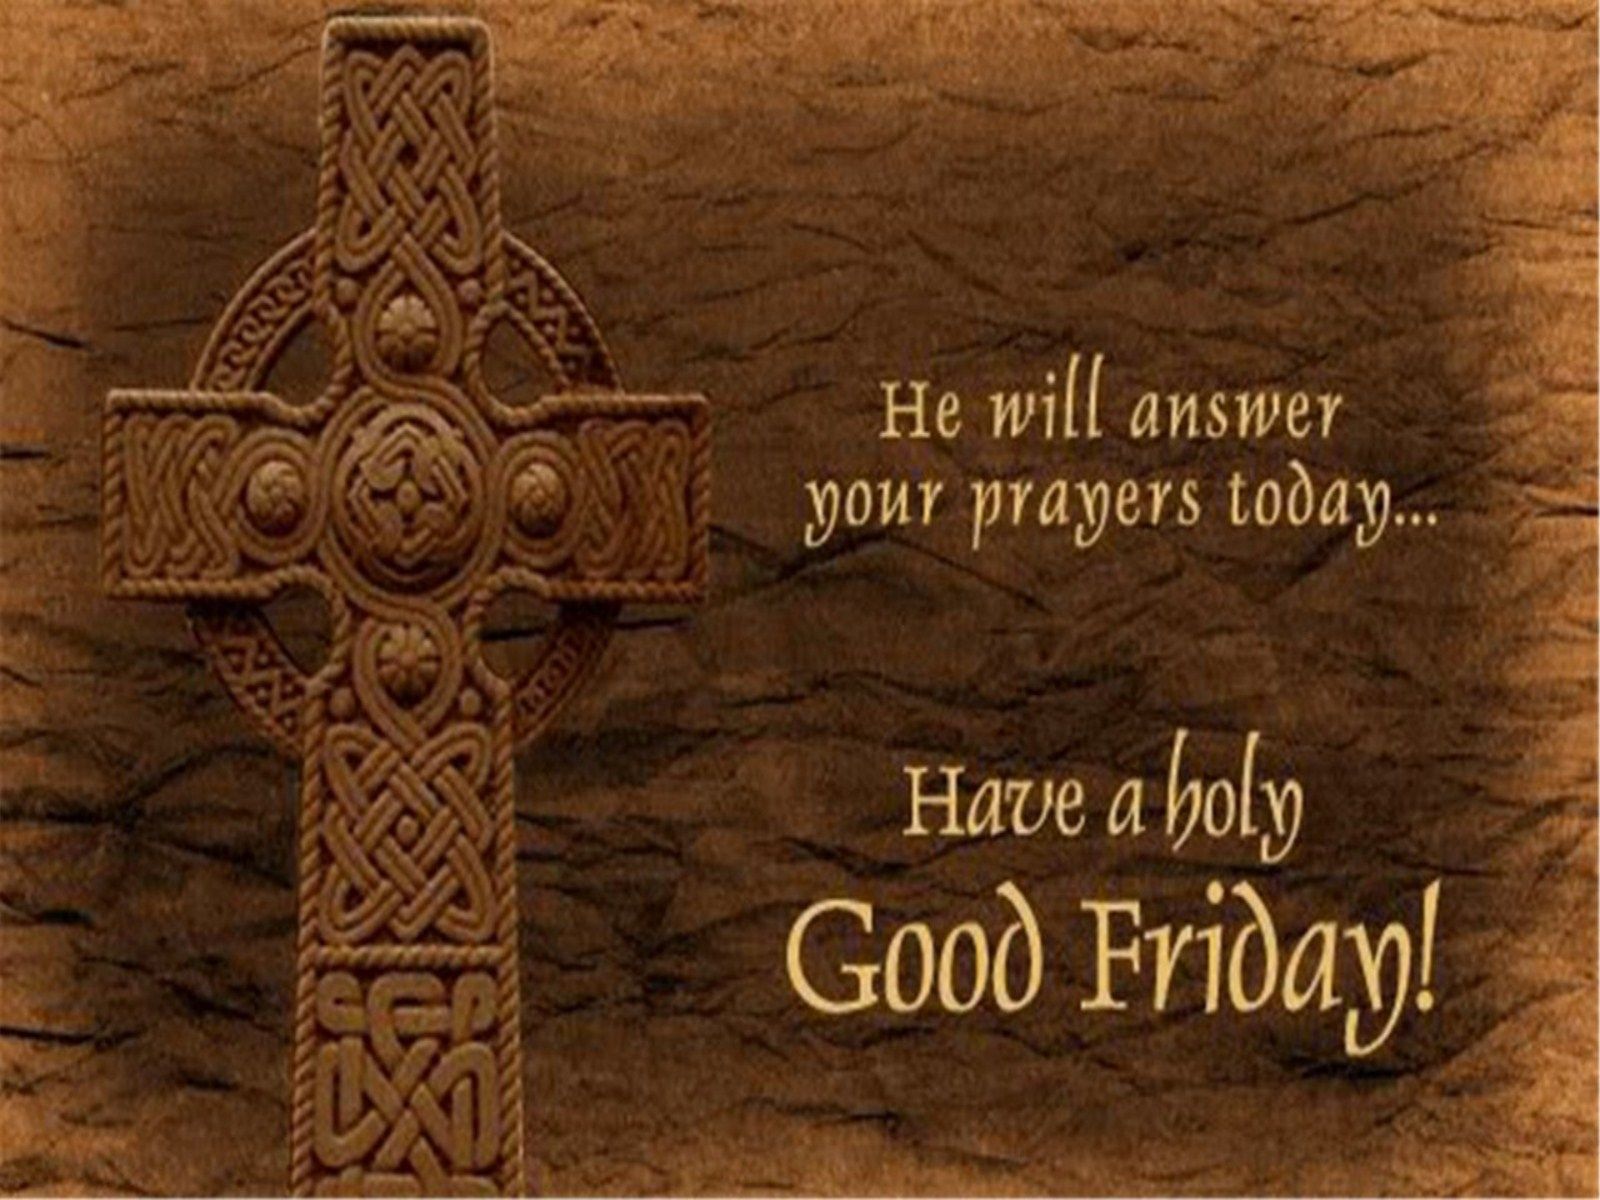 Good Friday Wallpapers